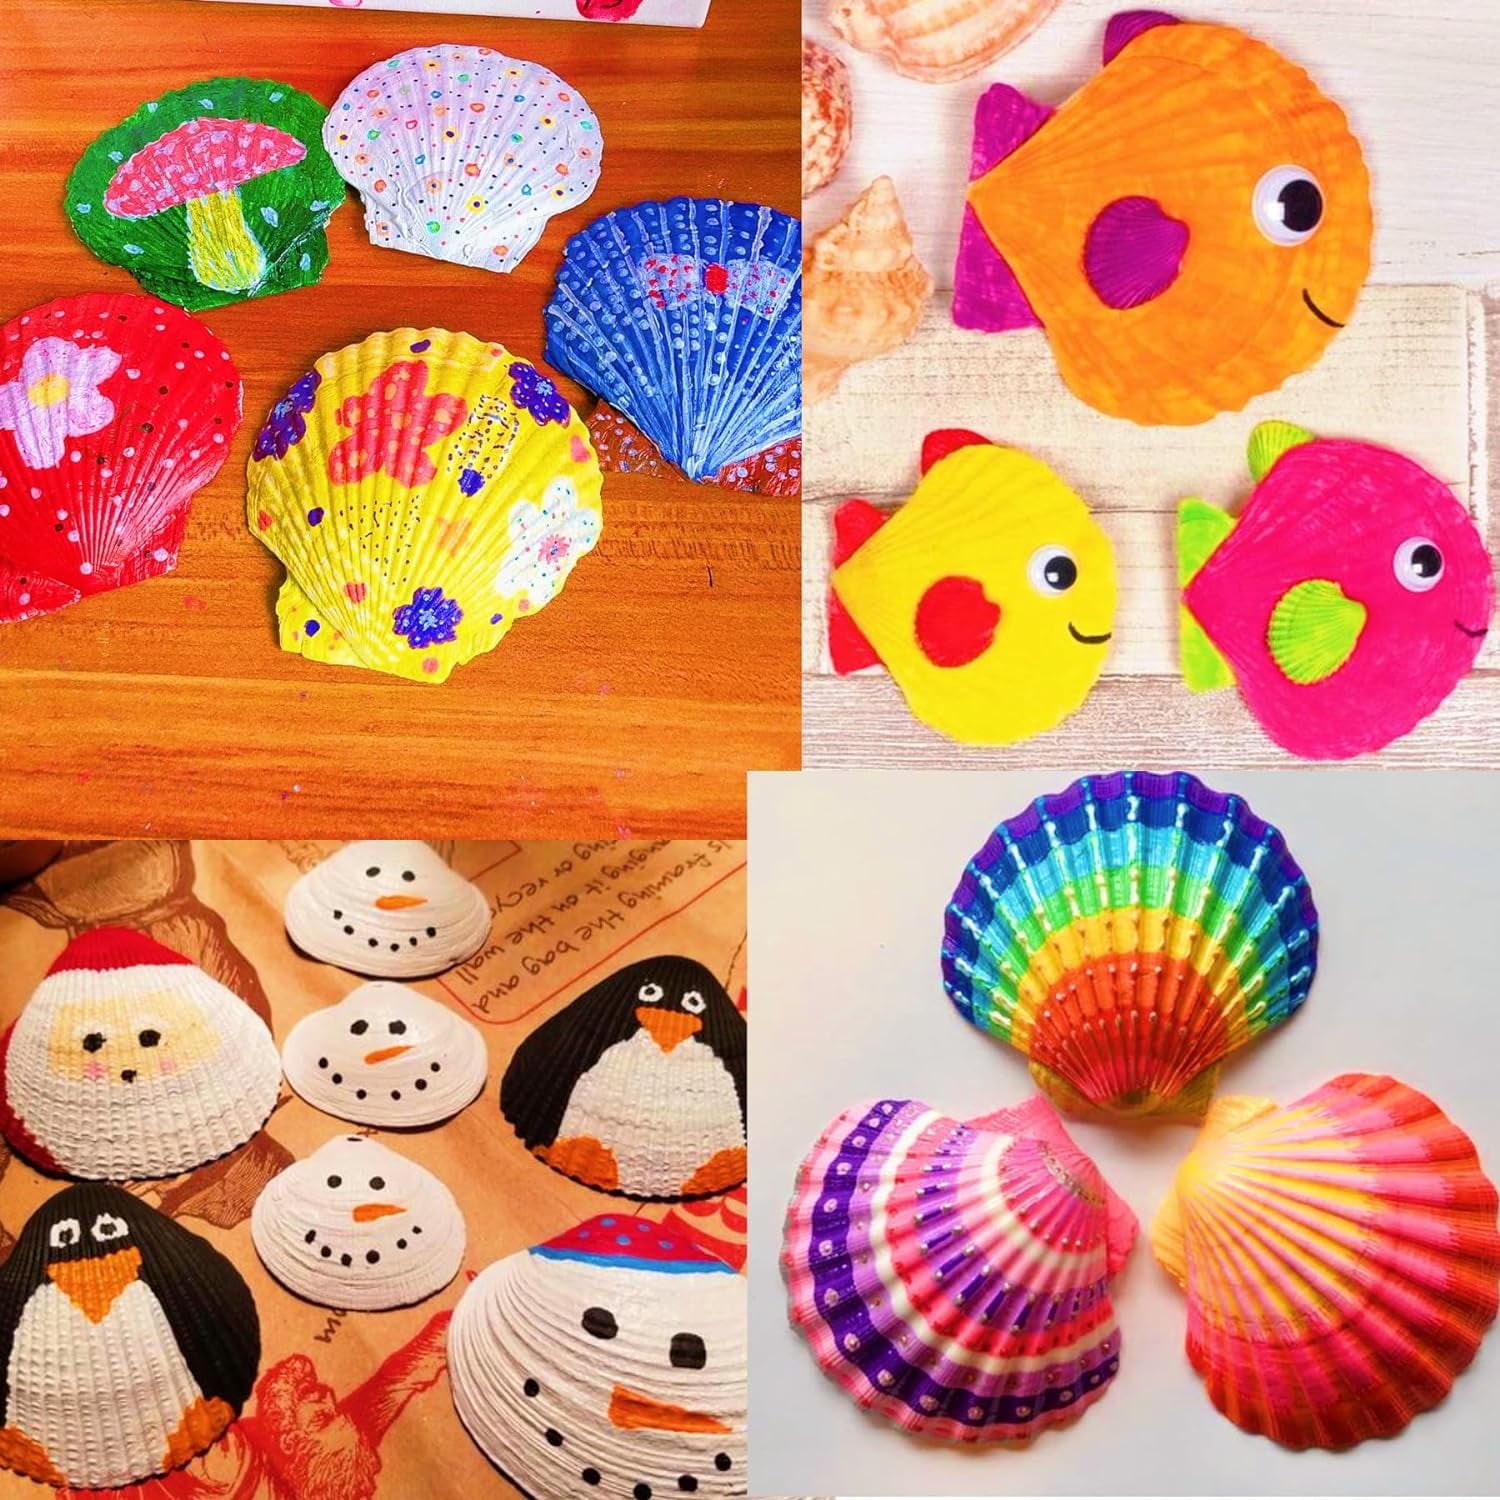 Shell Painting Kit-Arts and Crafts for Girls & Boys Ages 4-12 Craft Kits  Art Set with 10 Sea Shells & More Art Supplies Birthday Gifts Painting Toys  for 4 5 6 7 8 9 10 Year Old Kids Activities